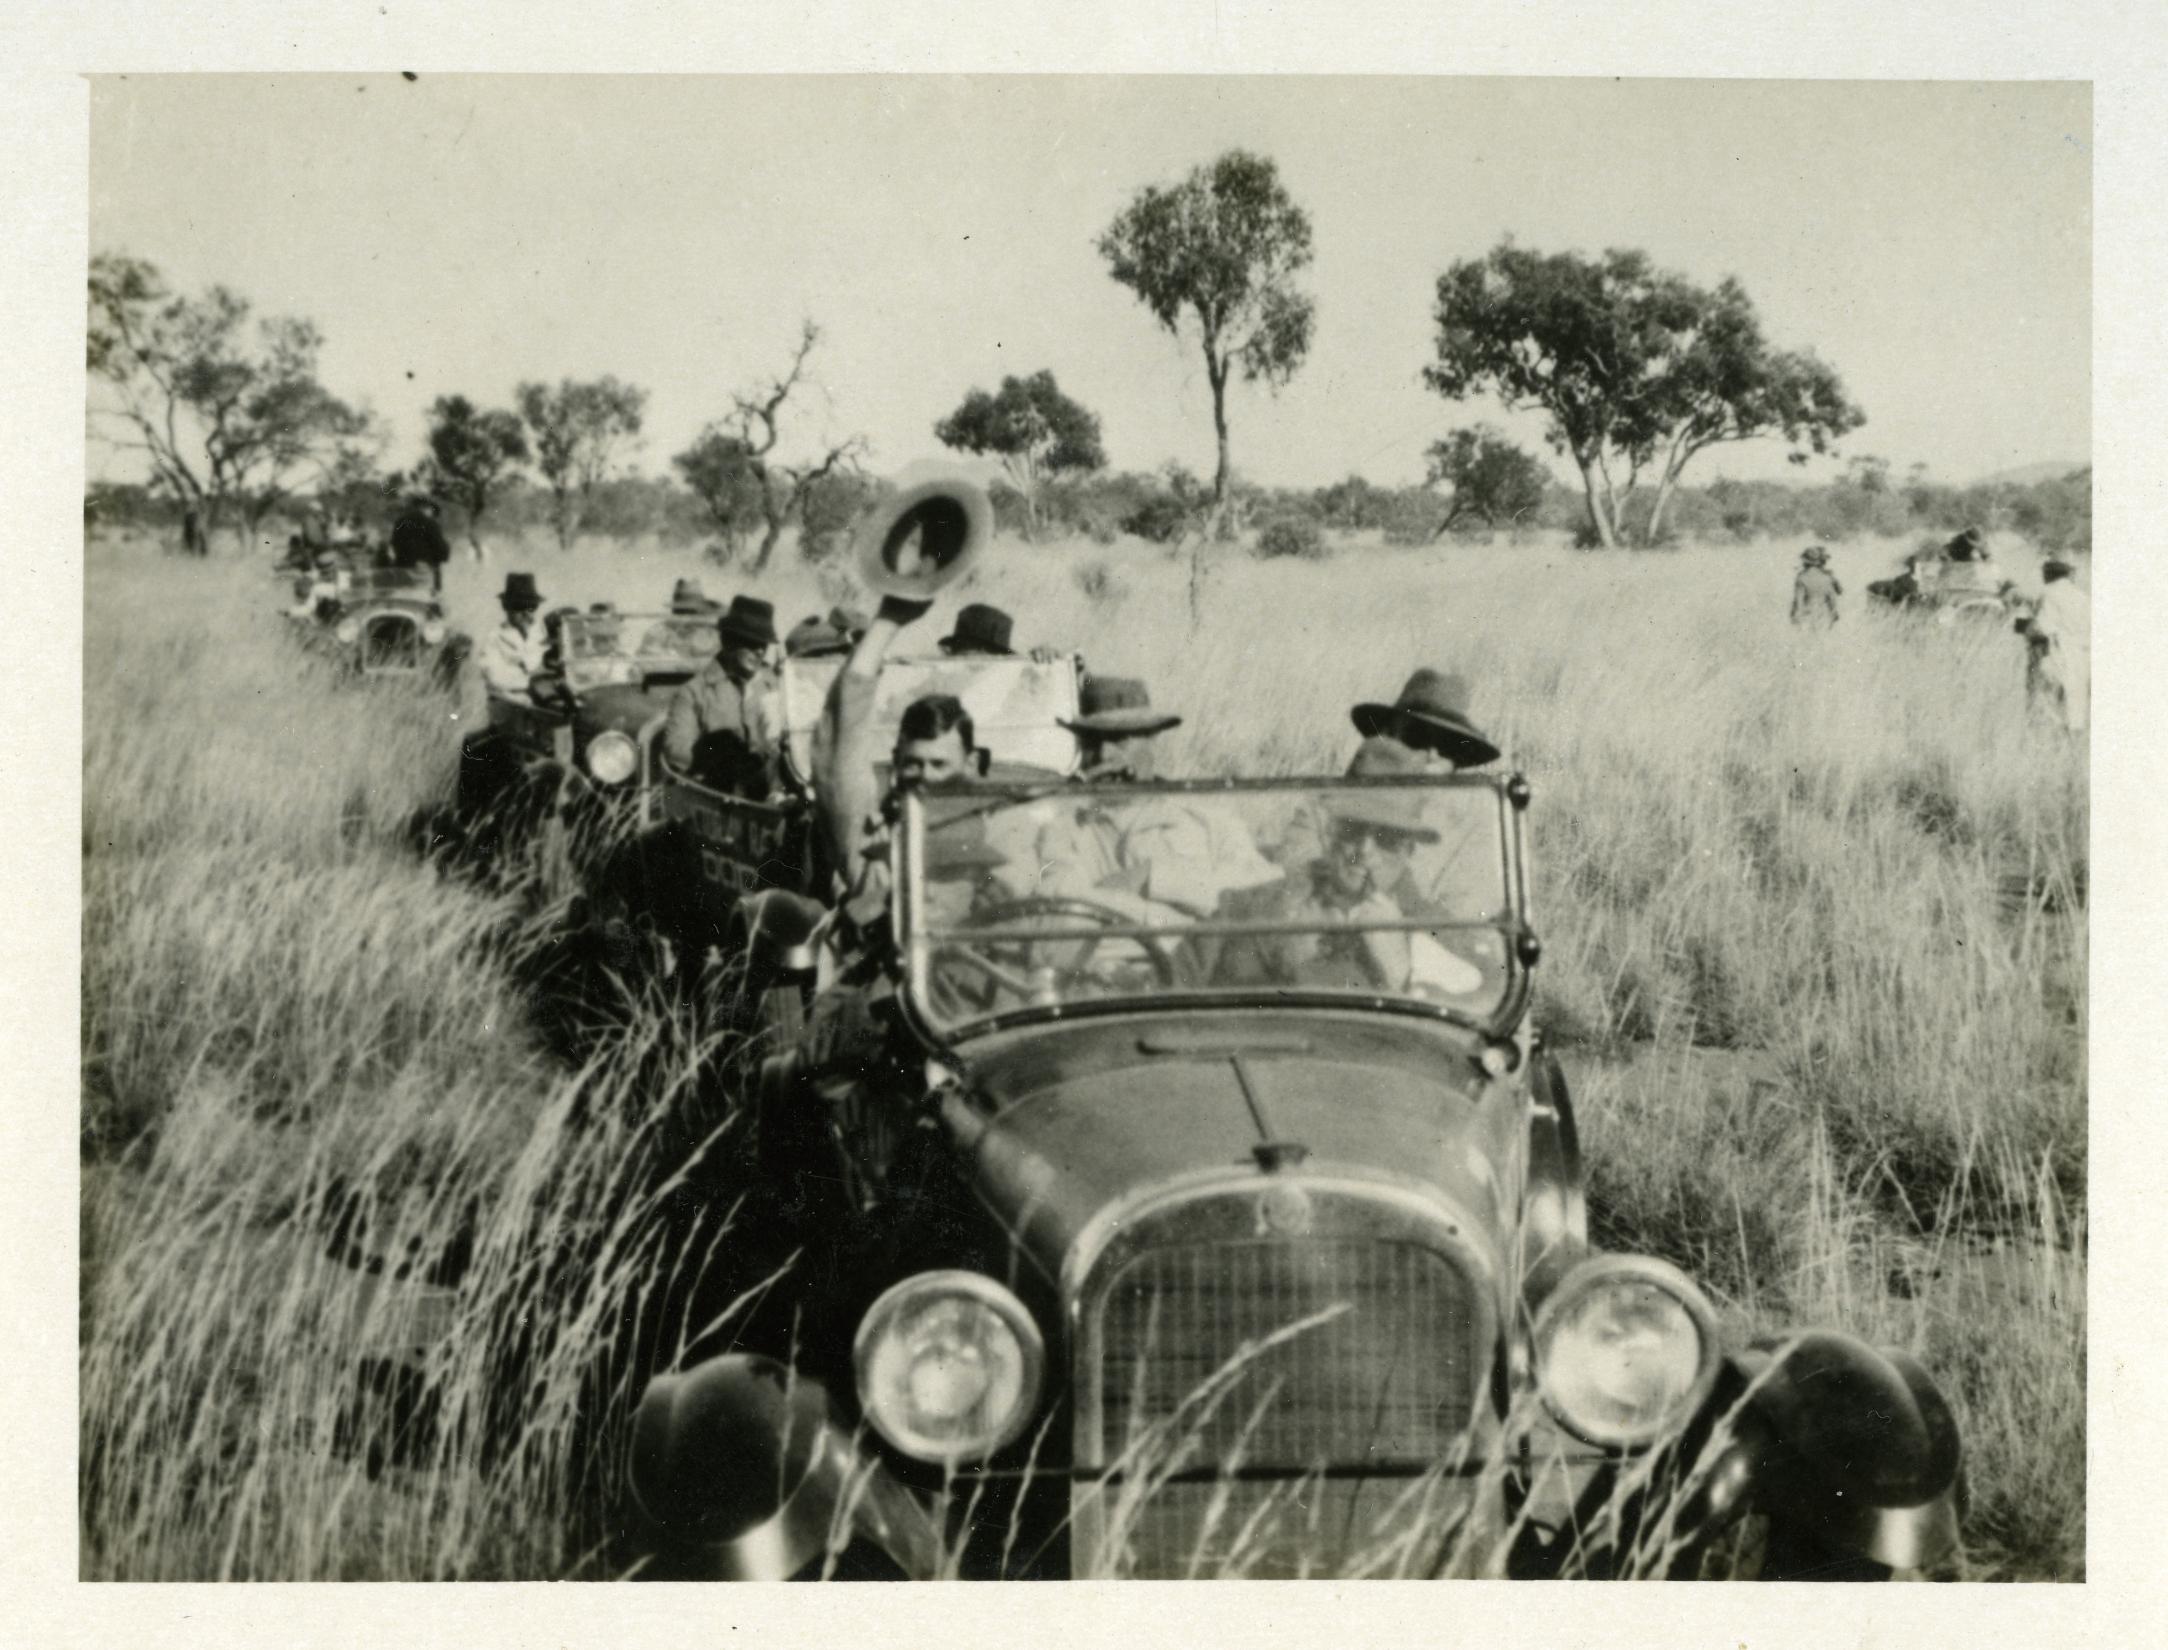 Motorcade of old cars traveling through tall grass in outback Northern Territory